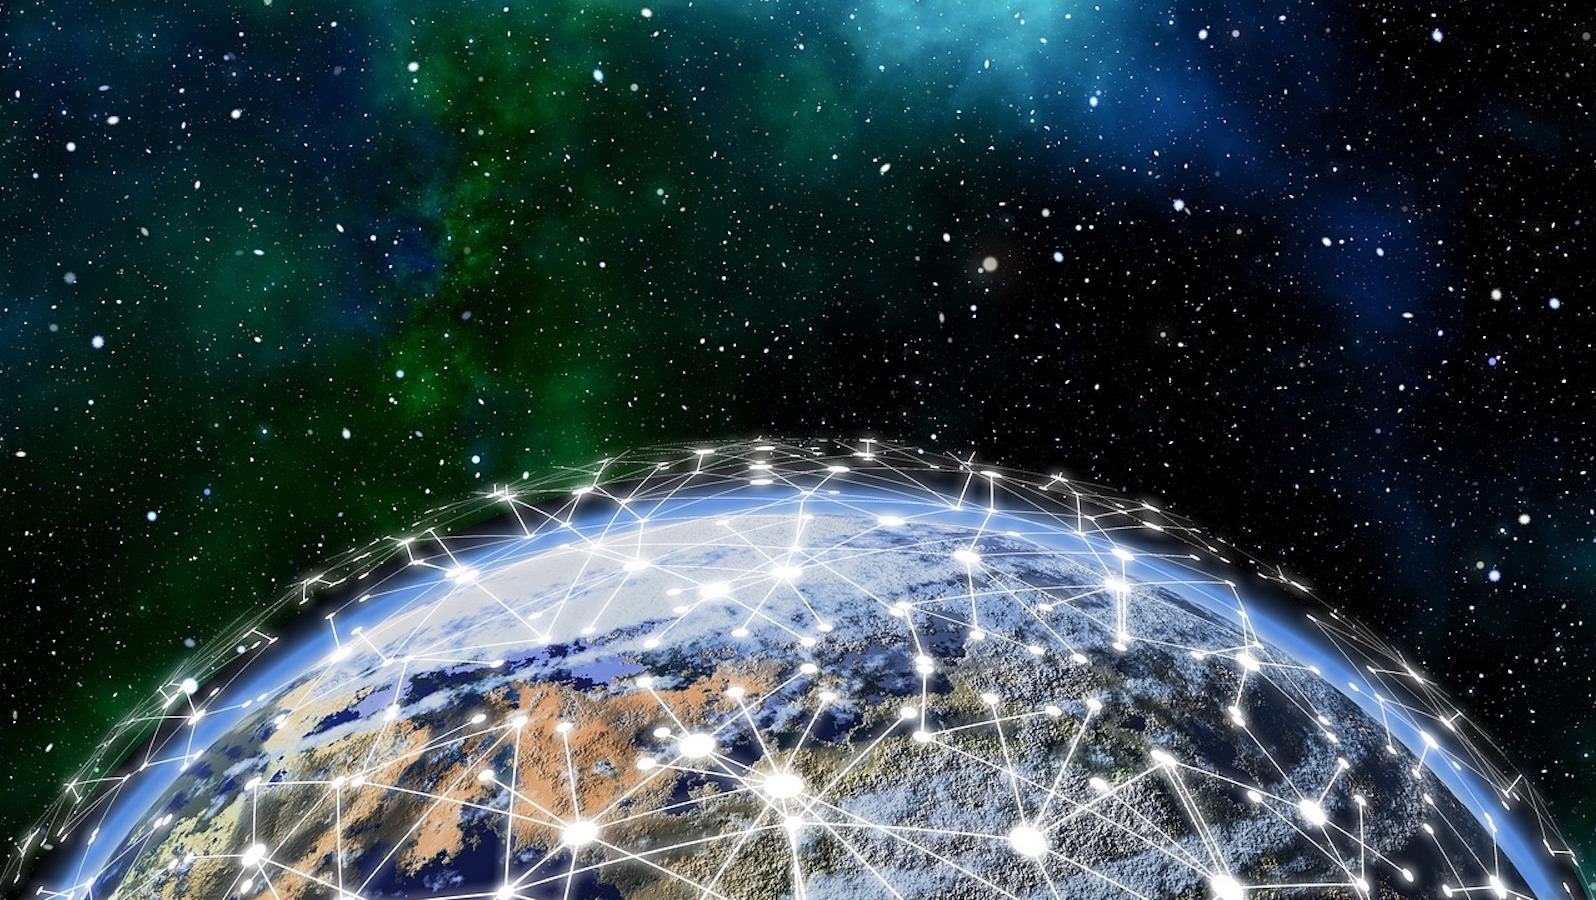 An image showing Earth from outer space with connected lines across the top showing blockchain